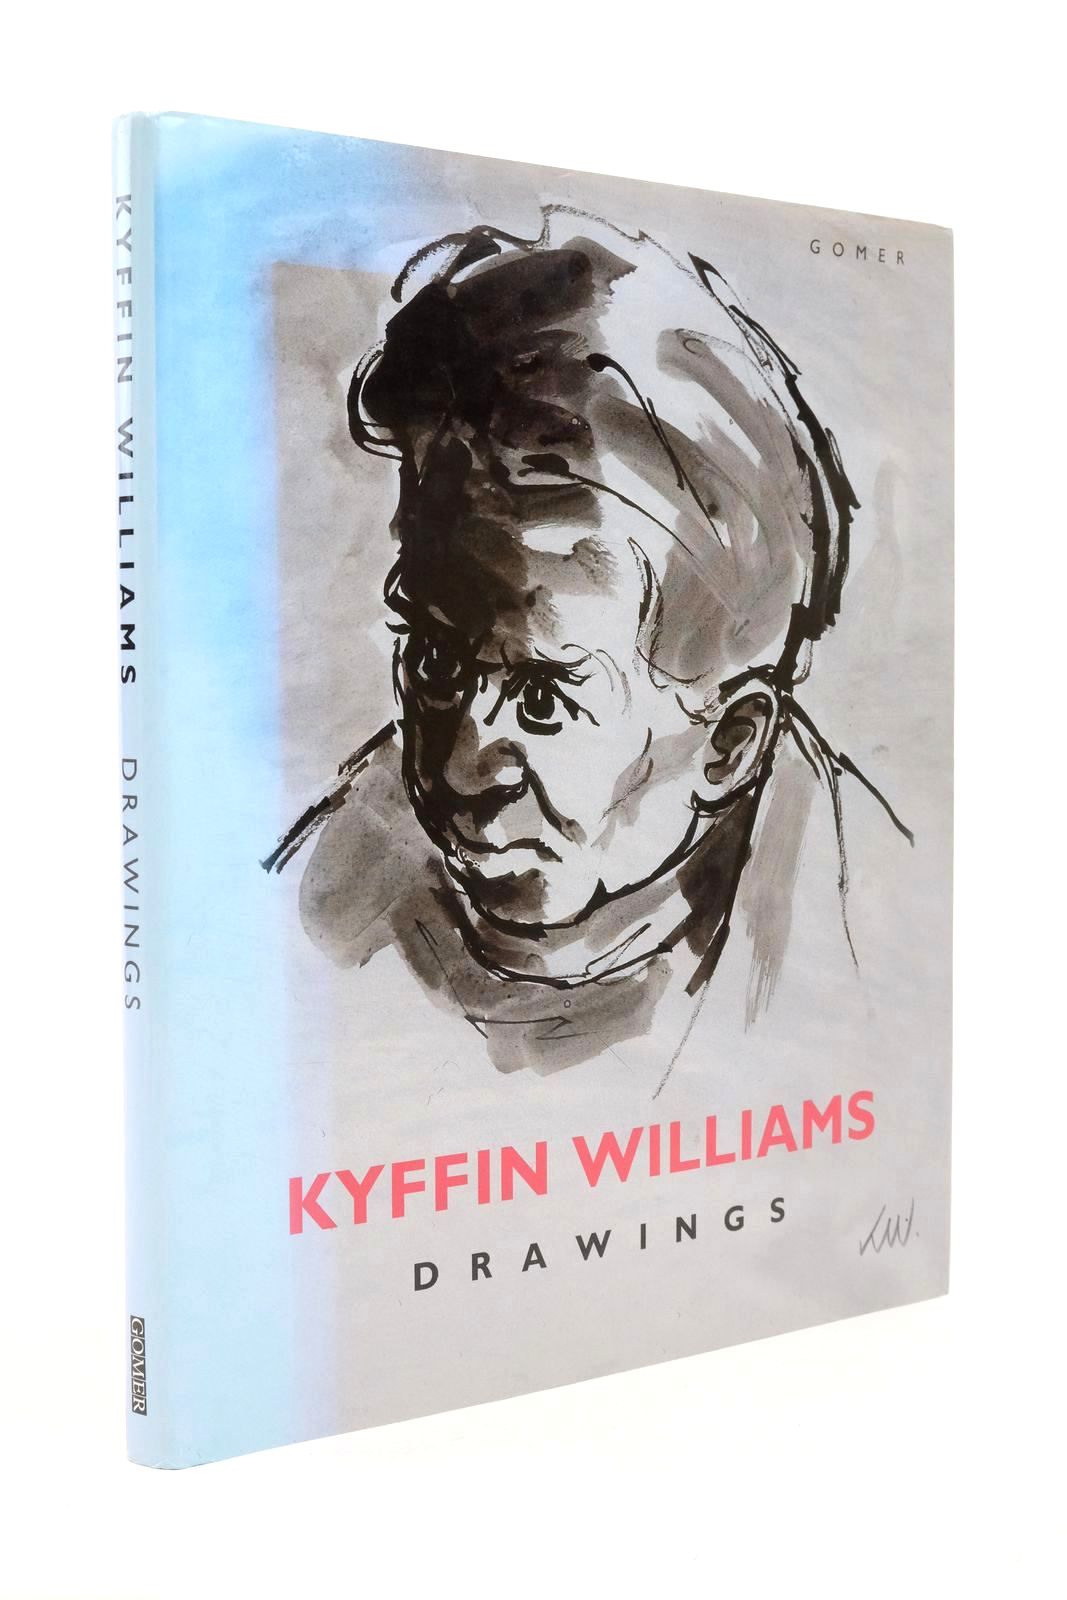 Photo of DRAWINGS written by Williams, Kyffin illustrated by Williams, Kyffin published by Gomer Press (STOCK CODE: 1322846)  for sale by Stella & Rose's Books